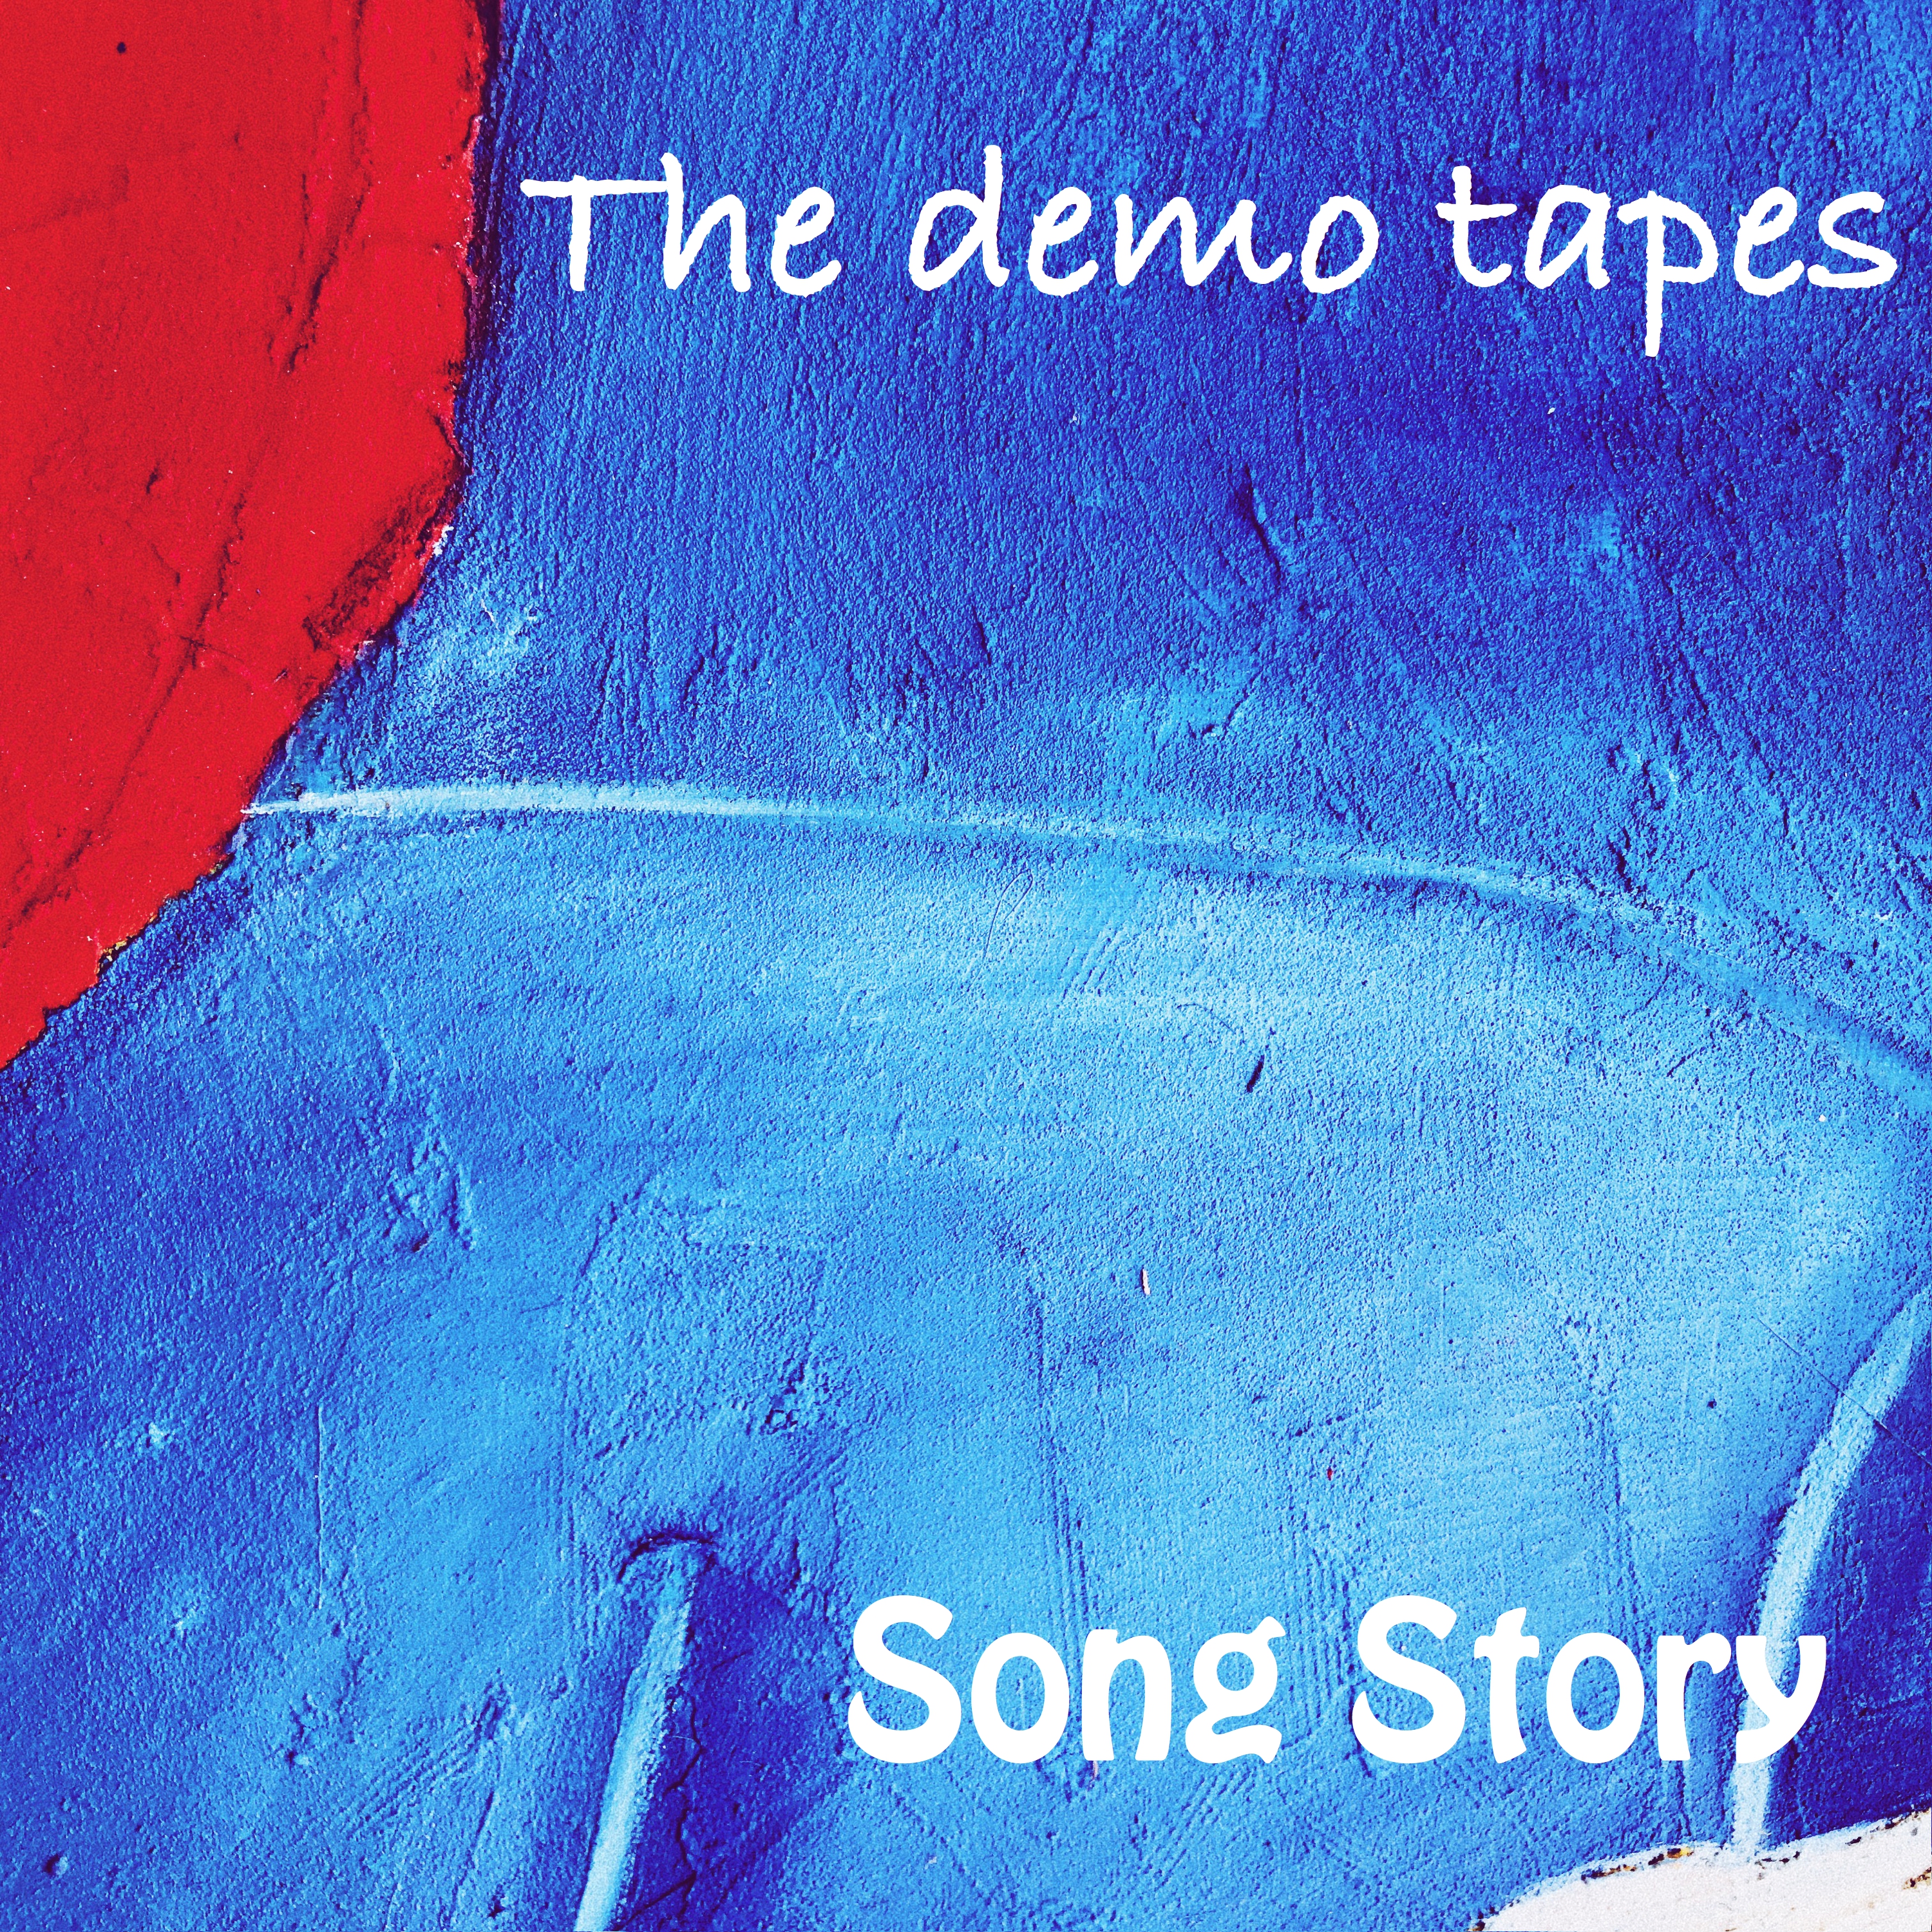 Song Story - The demo tapes